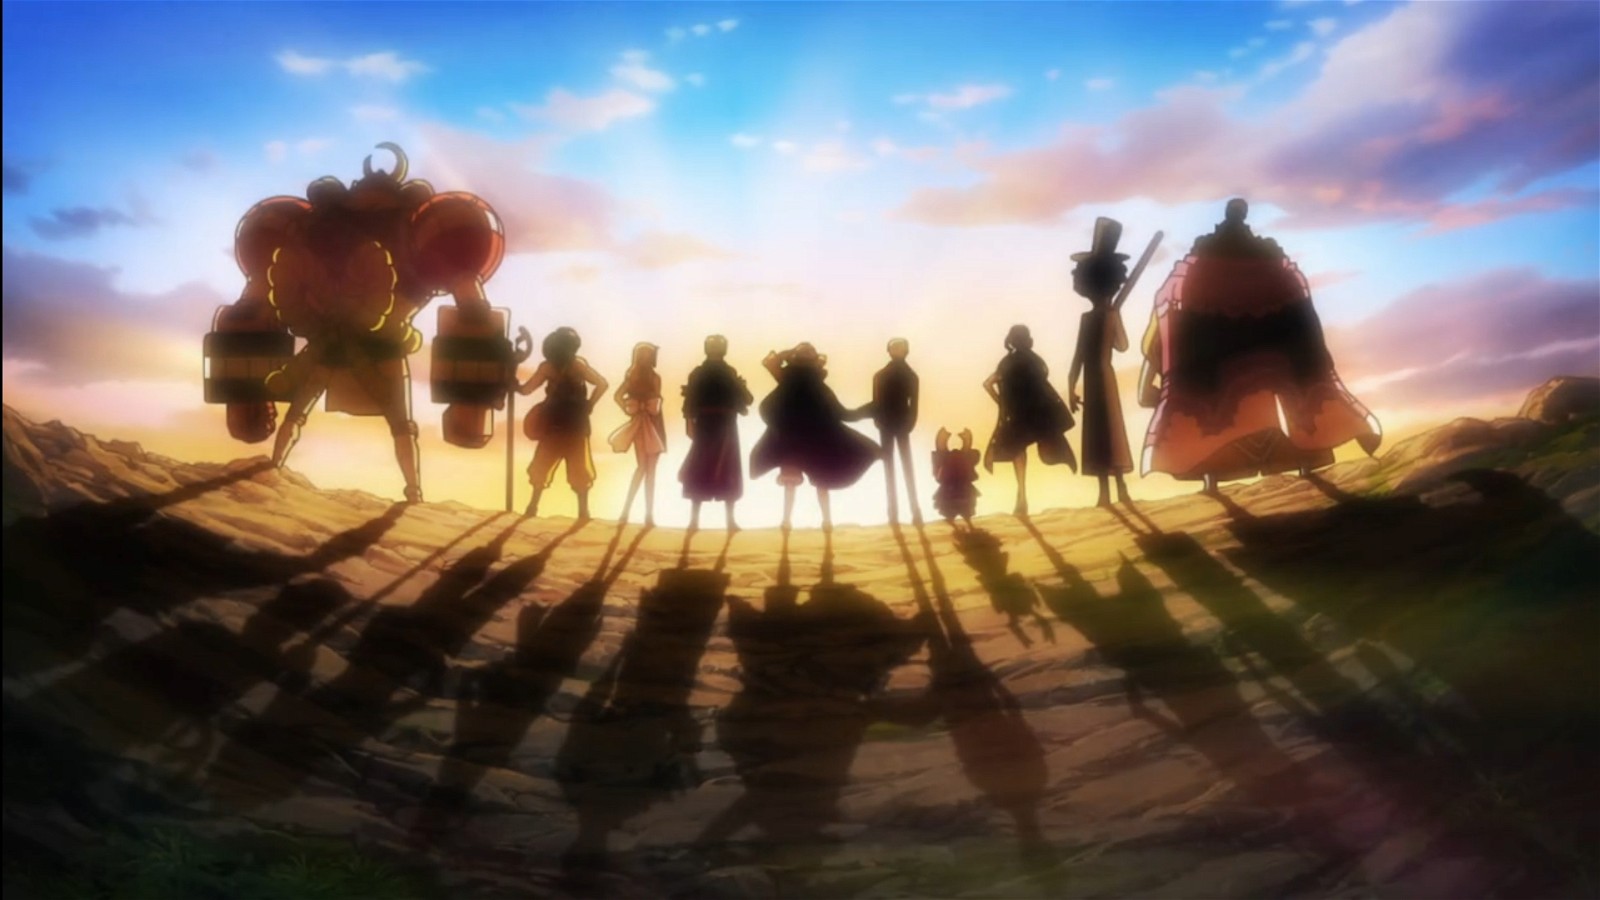 The Straw Hats Pirate Crew